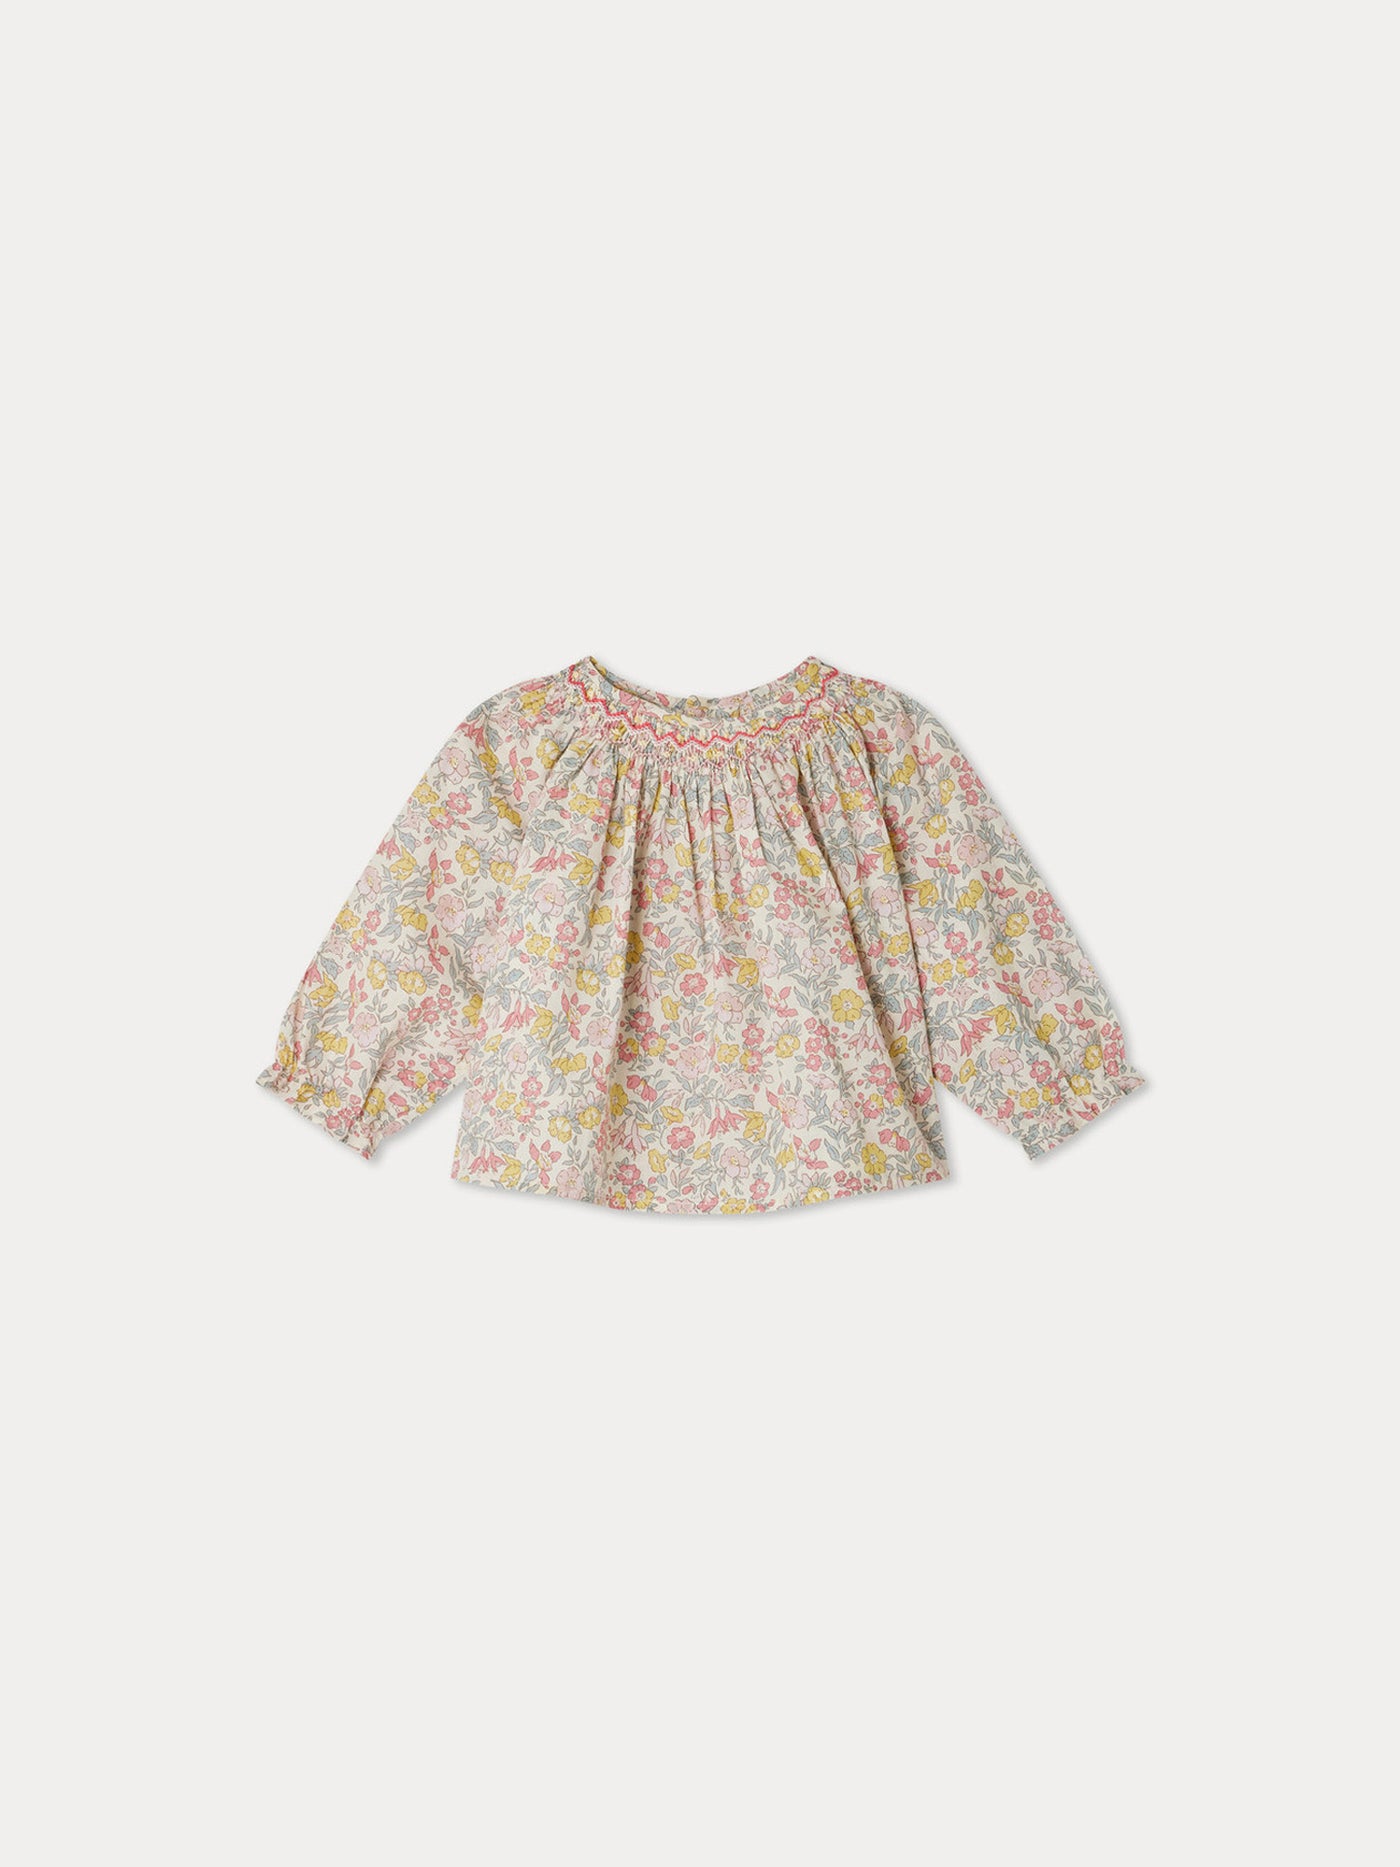 Griotte smocked blouse in pink Liberty fabric